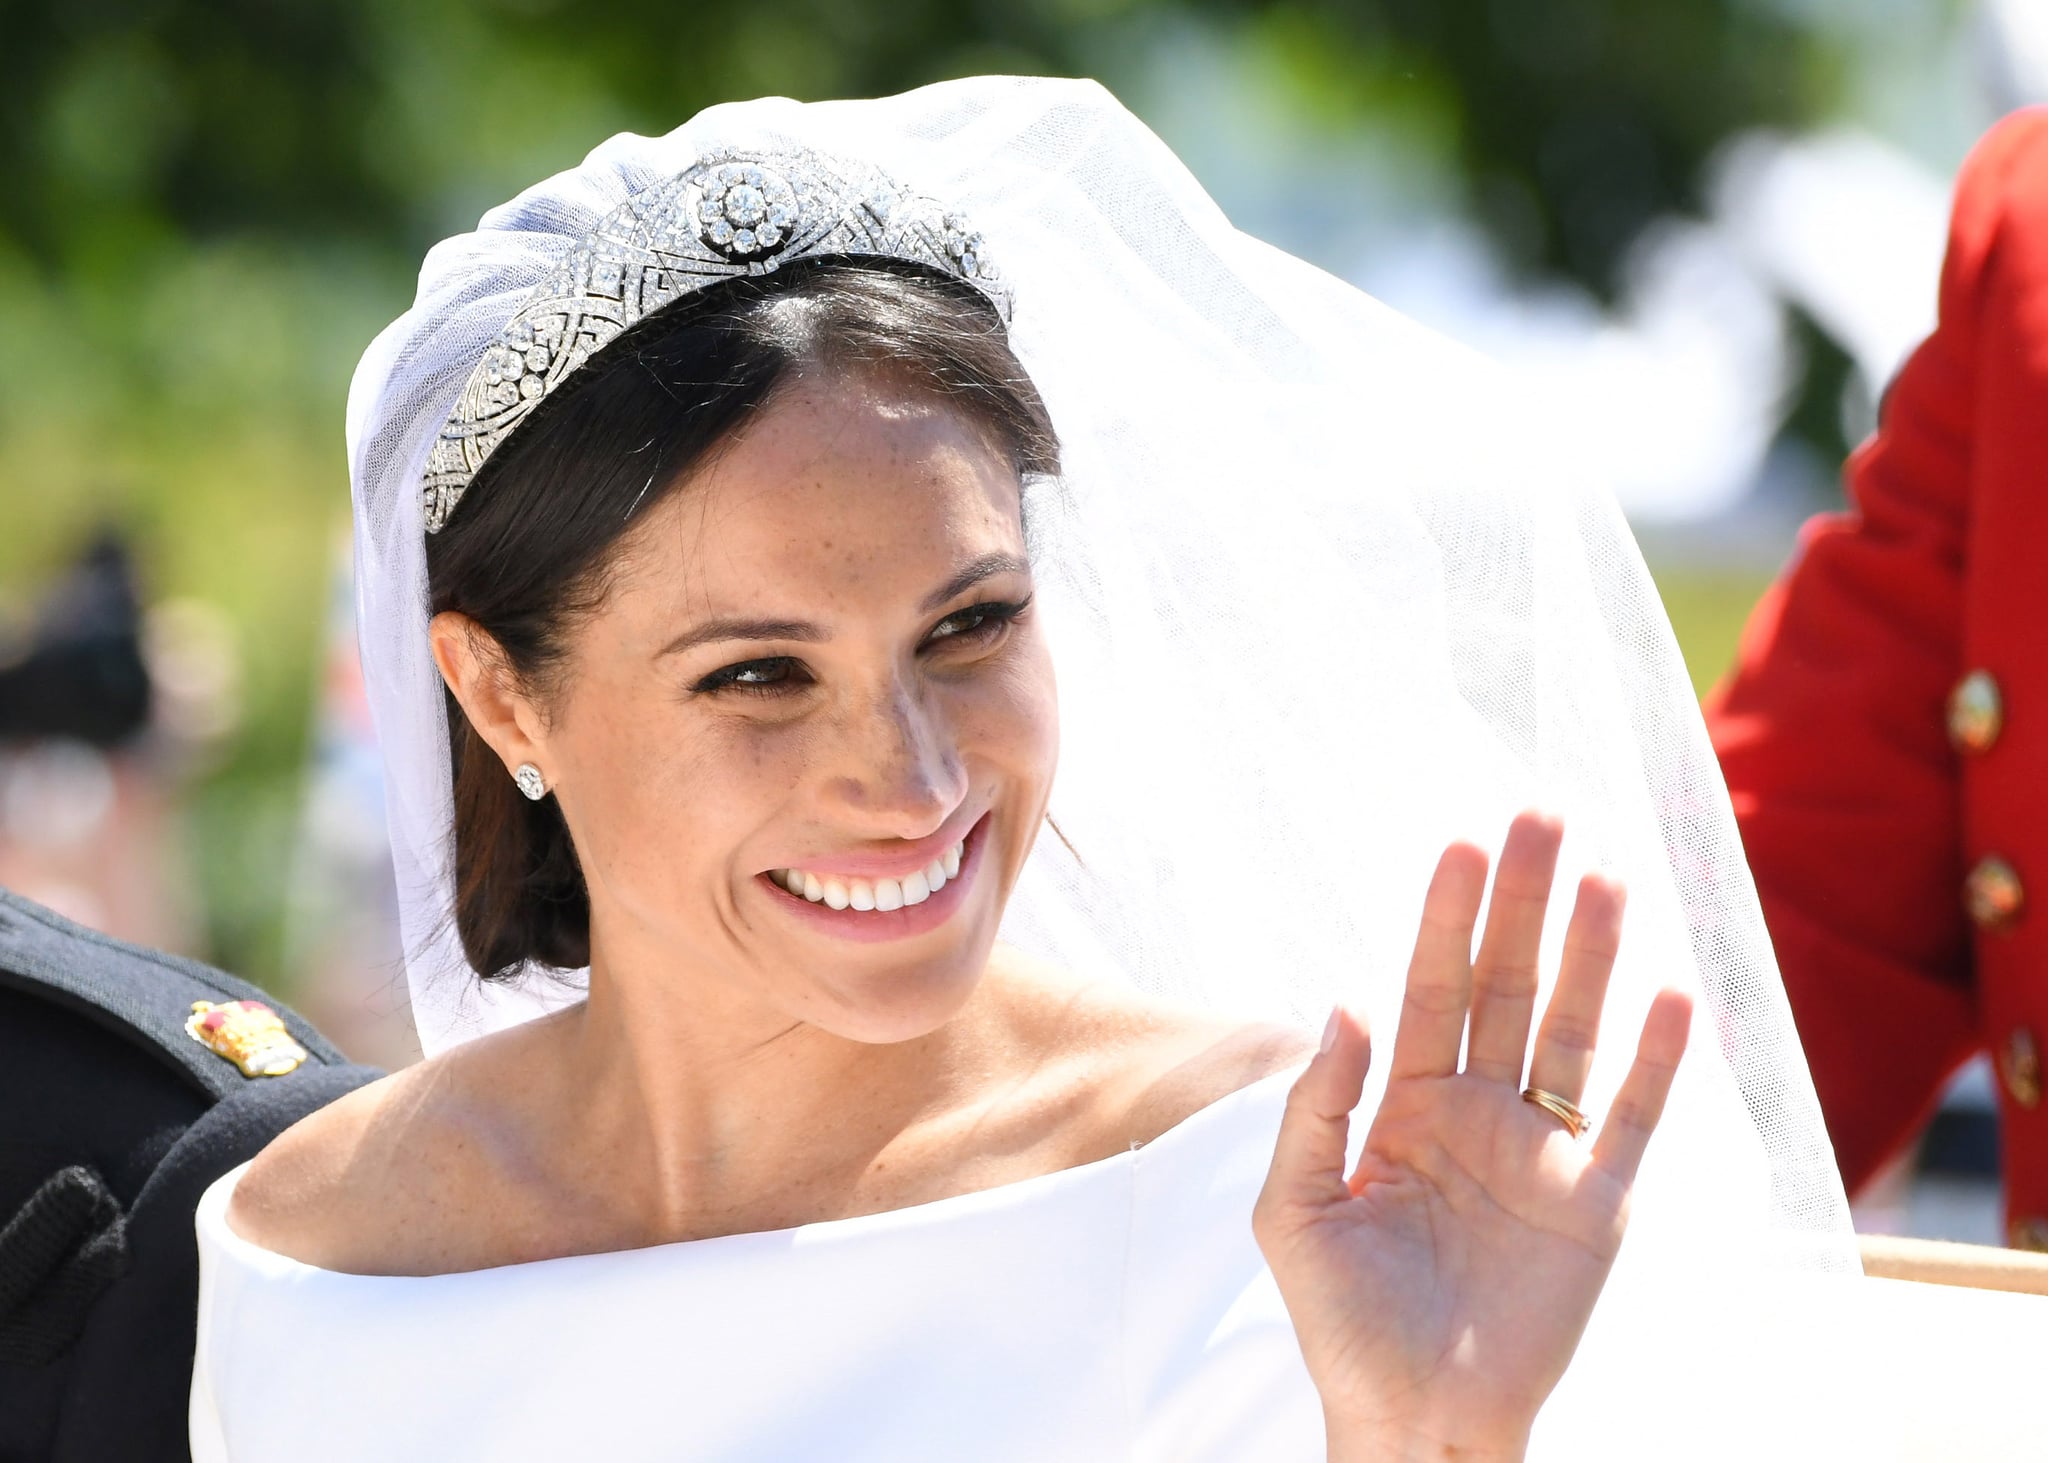 WINDSOR, ENGLAND - MAY 19:  Meghan, Duchess of Sussex leaves Windsor Castle in the Ascot Landau carriage during a procession after getting married at St Georges Chapel on May 19, 2018 in Windsor, England. Prince Henry Charles Albert David of Wales marries Ms. Meghan Markle in a service at St George's Chapel inside the grounds of Windsor Castle. Among the guests were 2200 members of the public, the royal family and Ms. Markle's mother, Doria Ragland.  (Photo by Karwai Tang/WireImage)